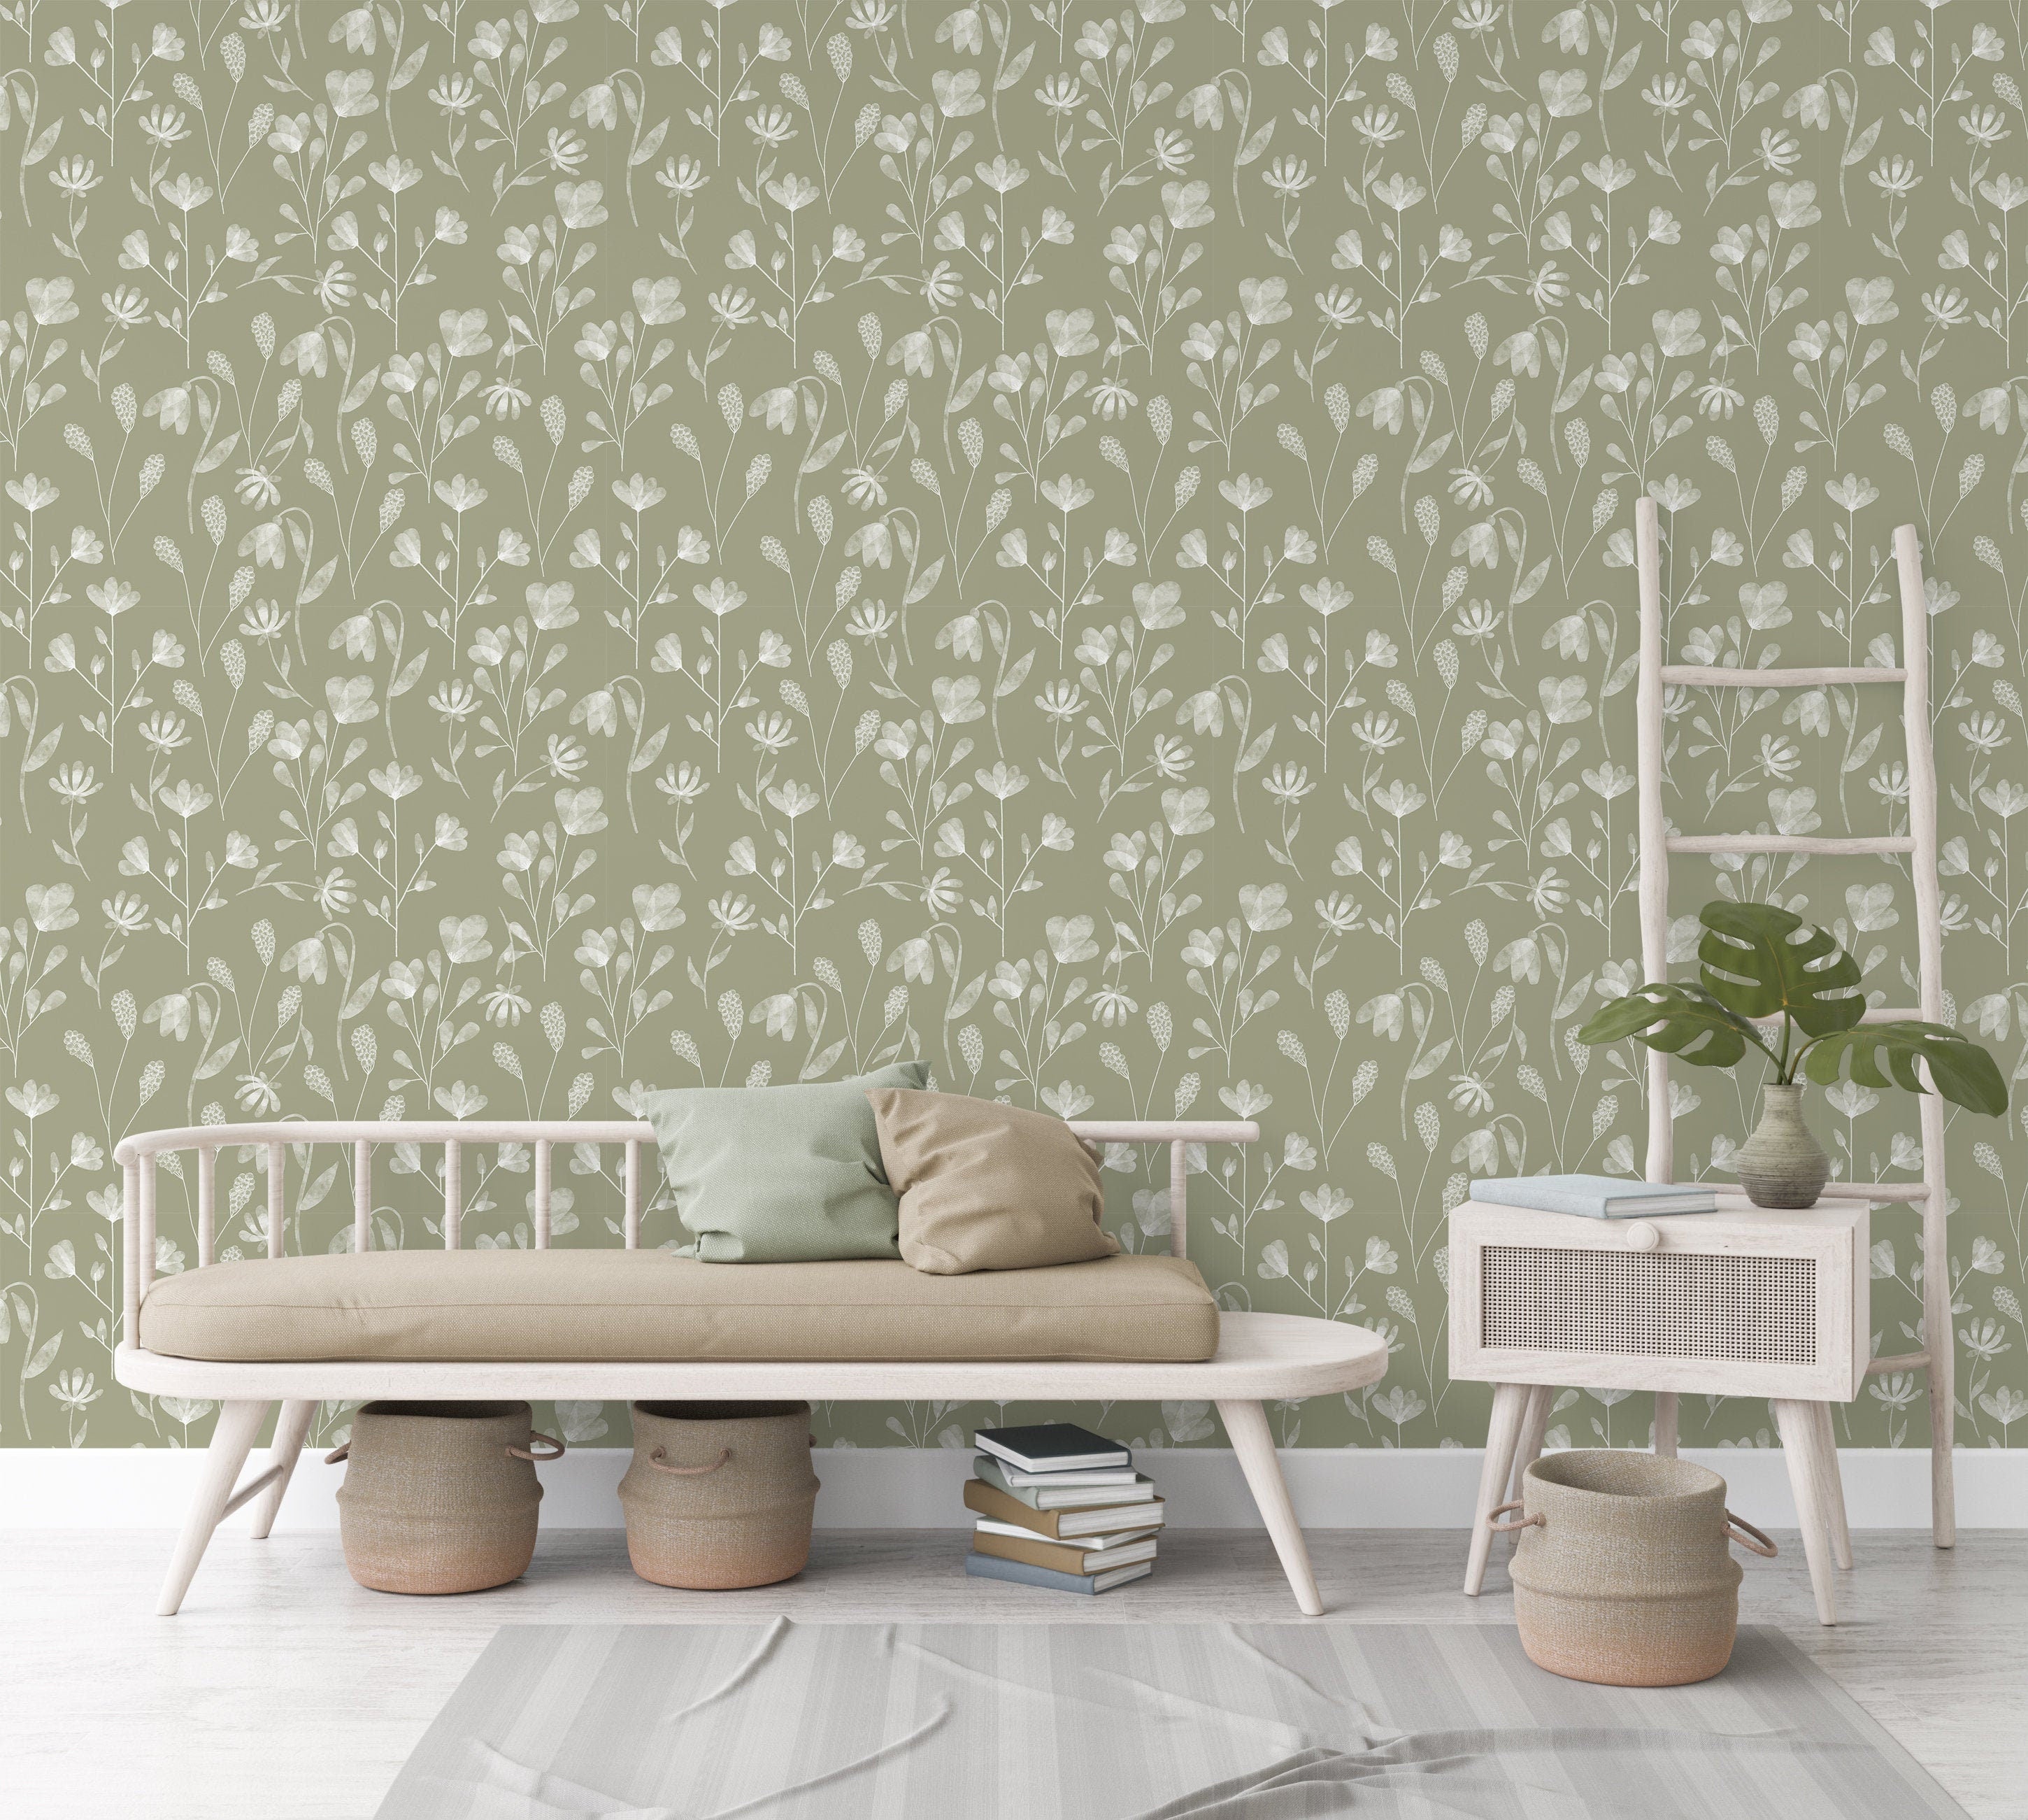 Olive Floral Wallpaper | Adhesive Wallpaper | Wallpaper Peel And Stick | Removable Wallpaper | Wall Paper Peel And Stick | Eco Friendly 2061 - JamesAndColors